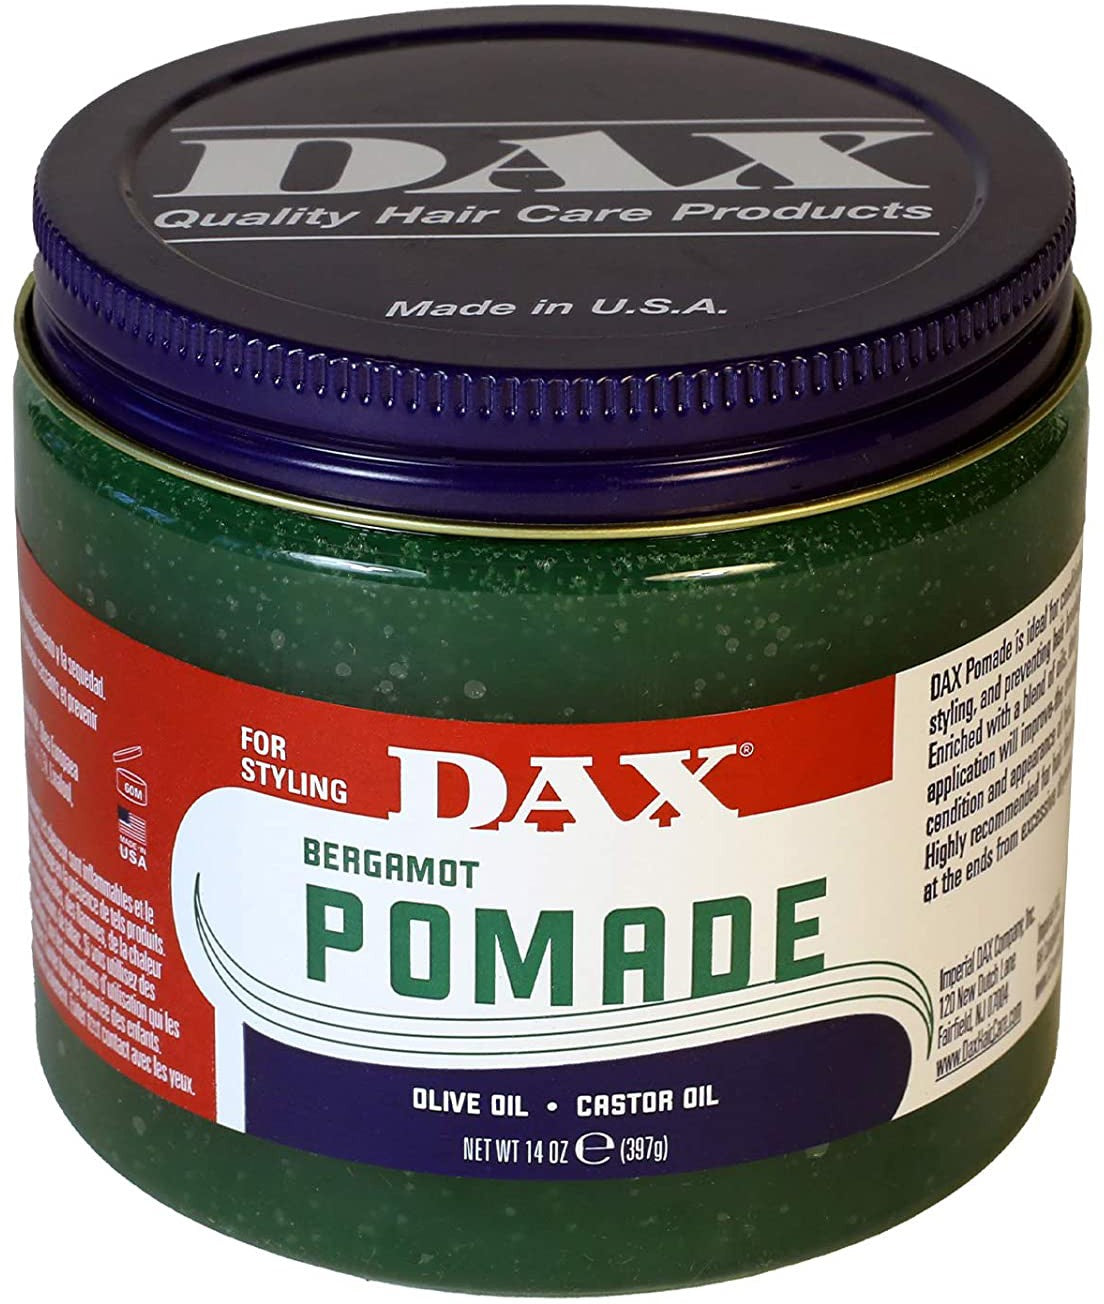 (COSMETICS HAIR CARE) Dax Vegetable Pomade Green 14 oz.